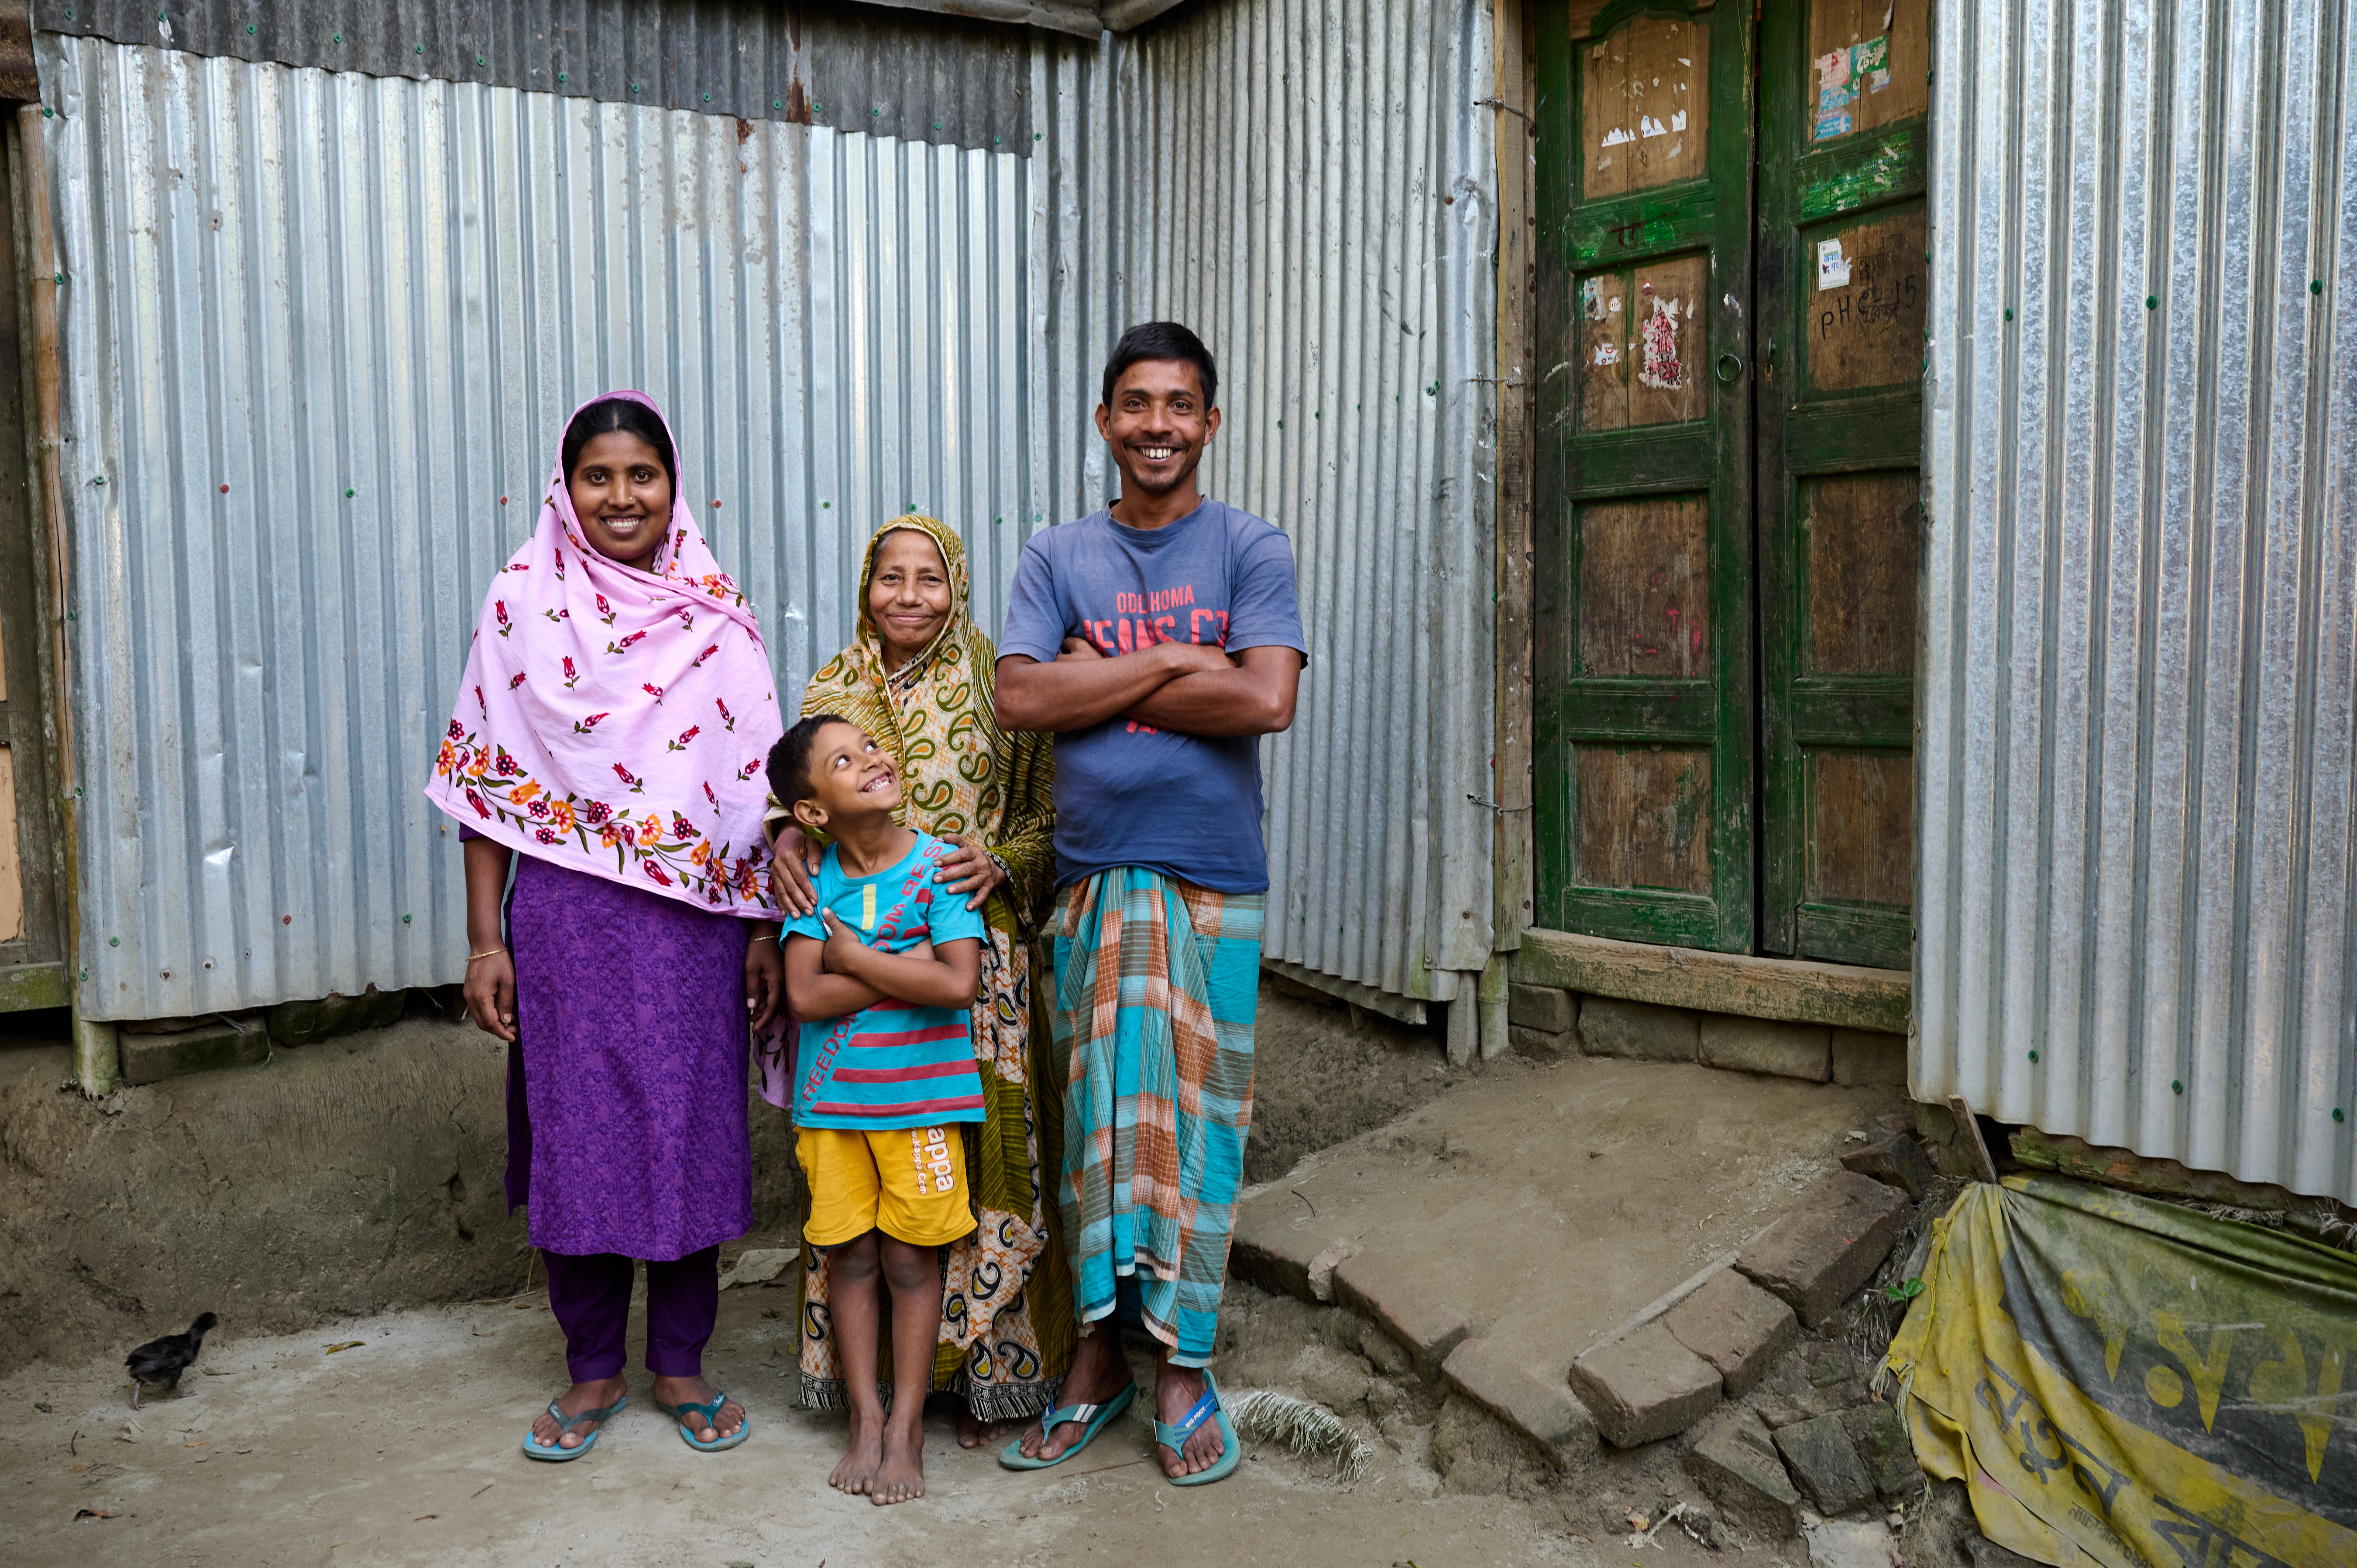 A woman stands with her mother-in-law, husband and child. All four are smiling and posing for the camera.